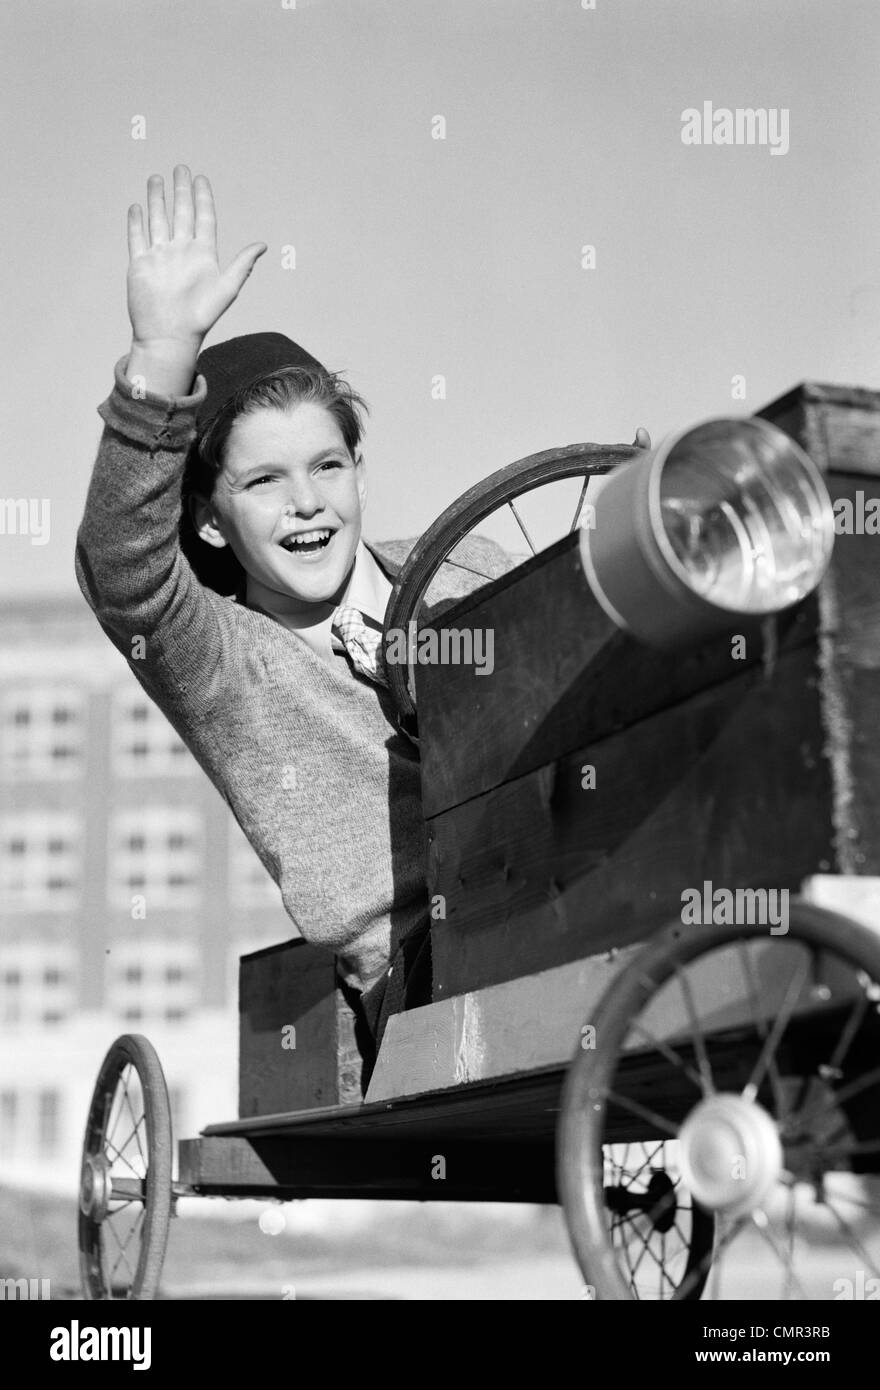 1940s BOY IN HOMEMADE RACE CAR GO-CART SMILING AND WAVING SOAPBOX DERBY Stock Photo